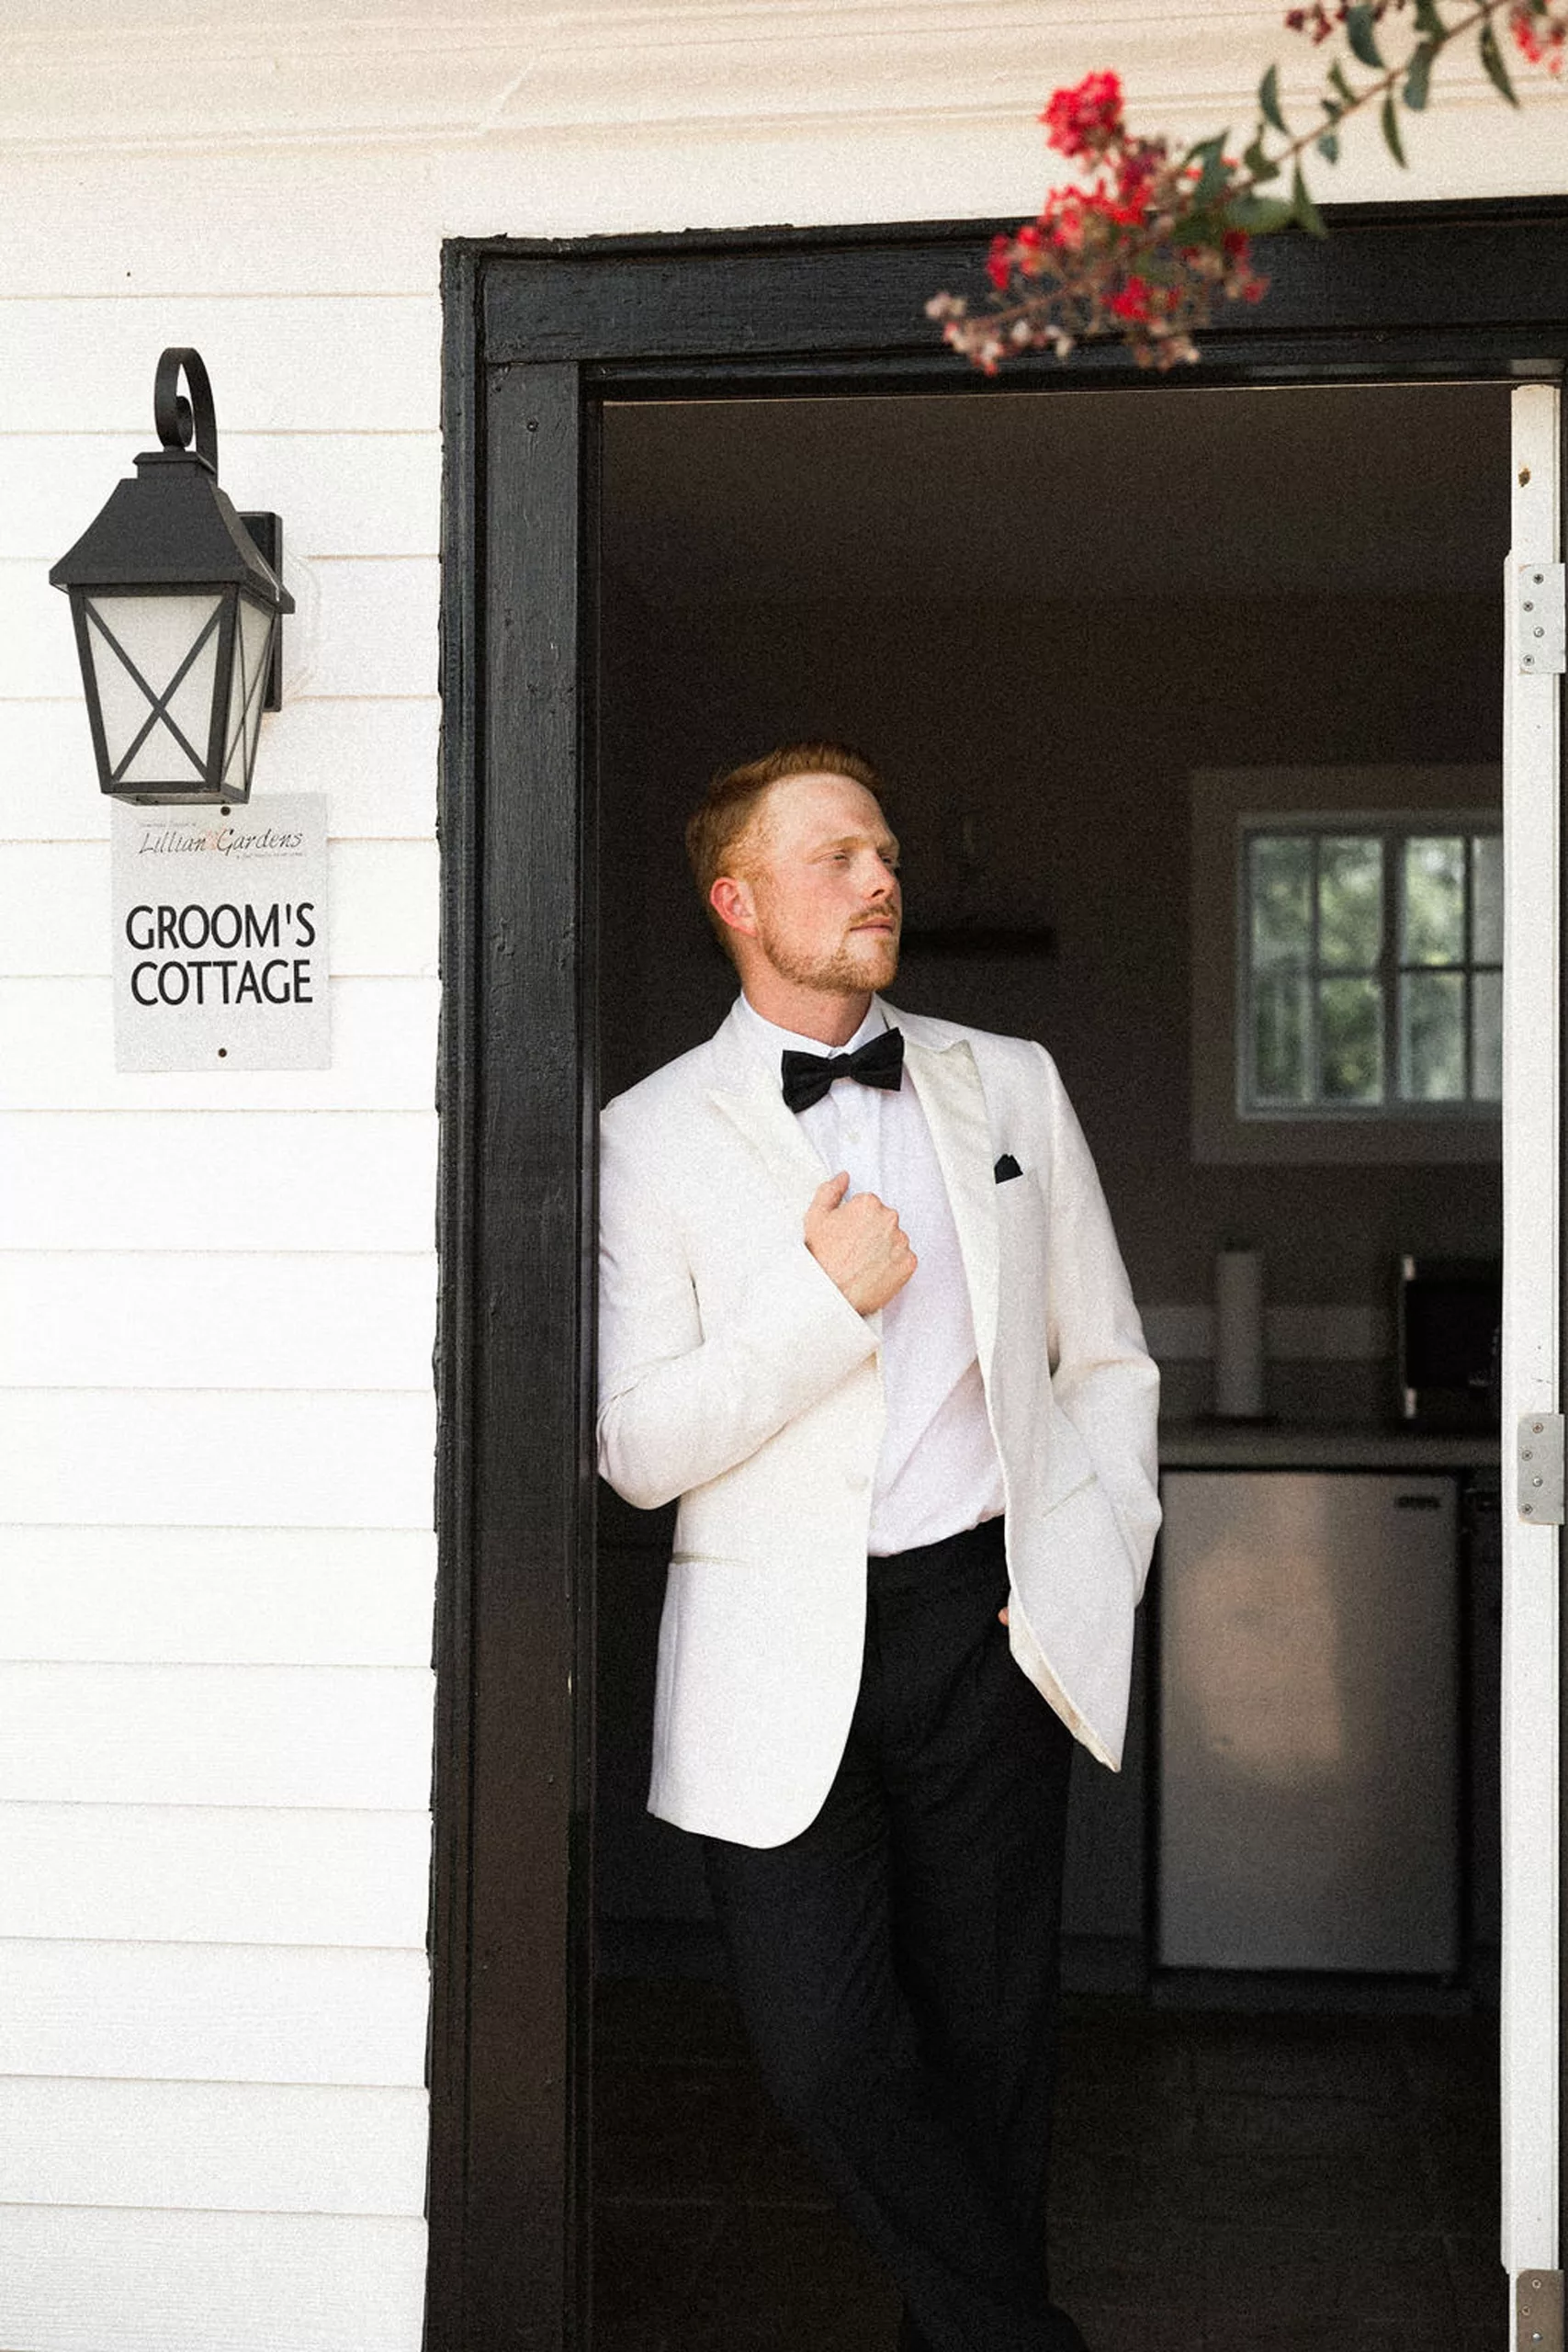 A groom holds his lapel of his white suit jacket at the lillian gardens wedding venue groom's cottage door